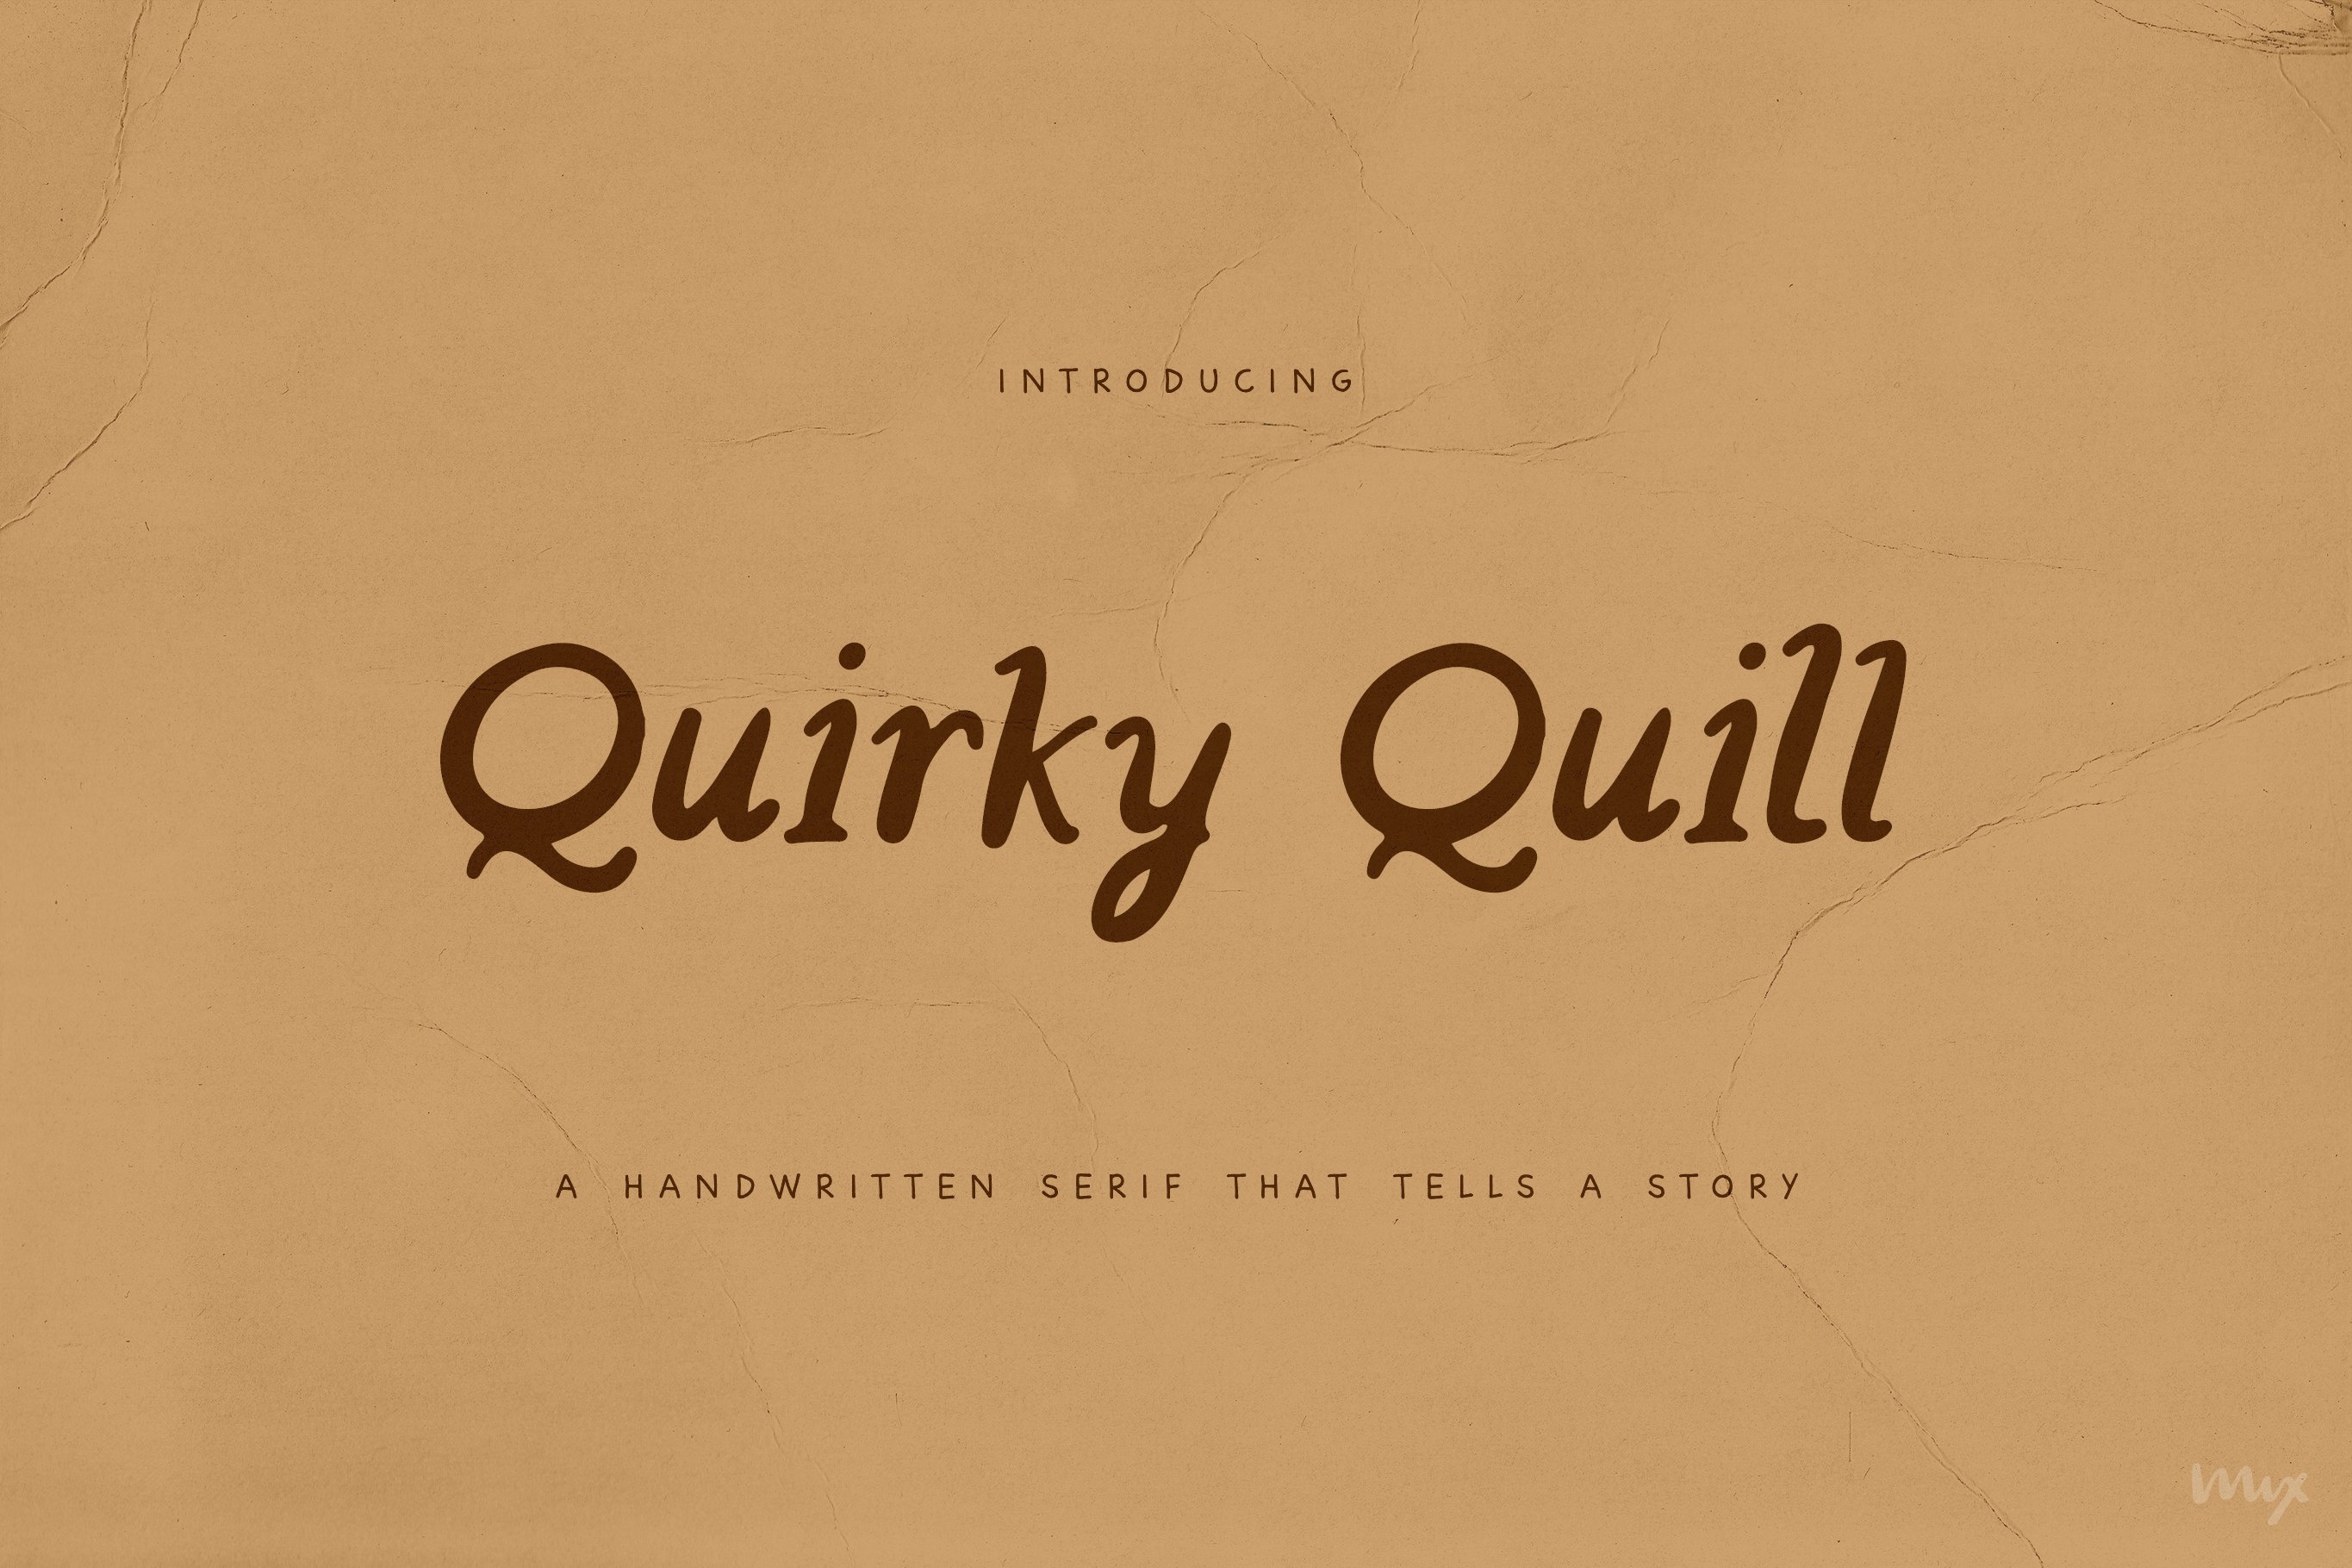 Quirky Quill — A Handwritten Serifcover image.